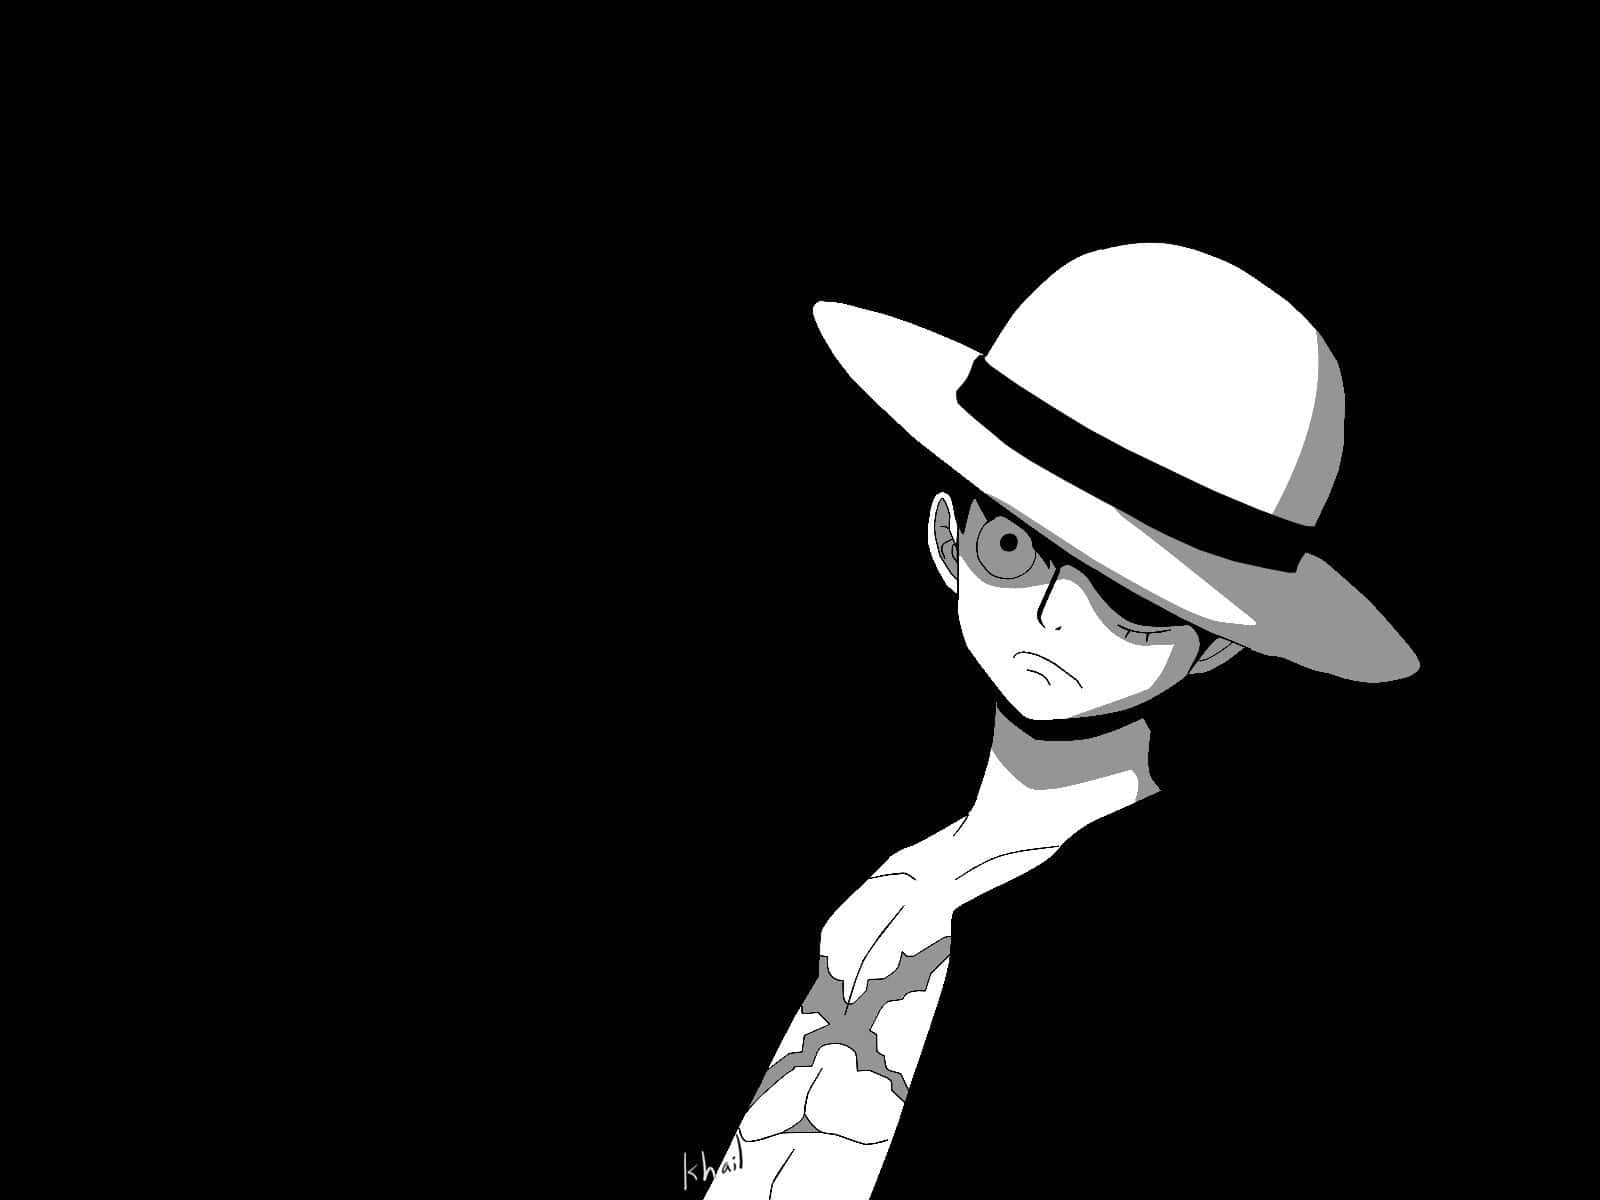 Luffy from One Piece in a Stylish Black and White Portrait Wallpaper